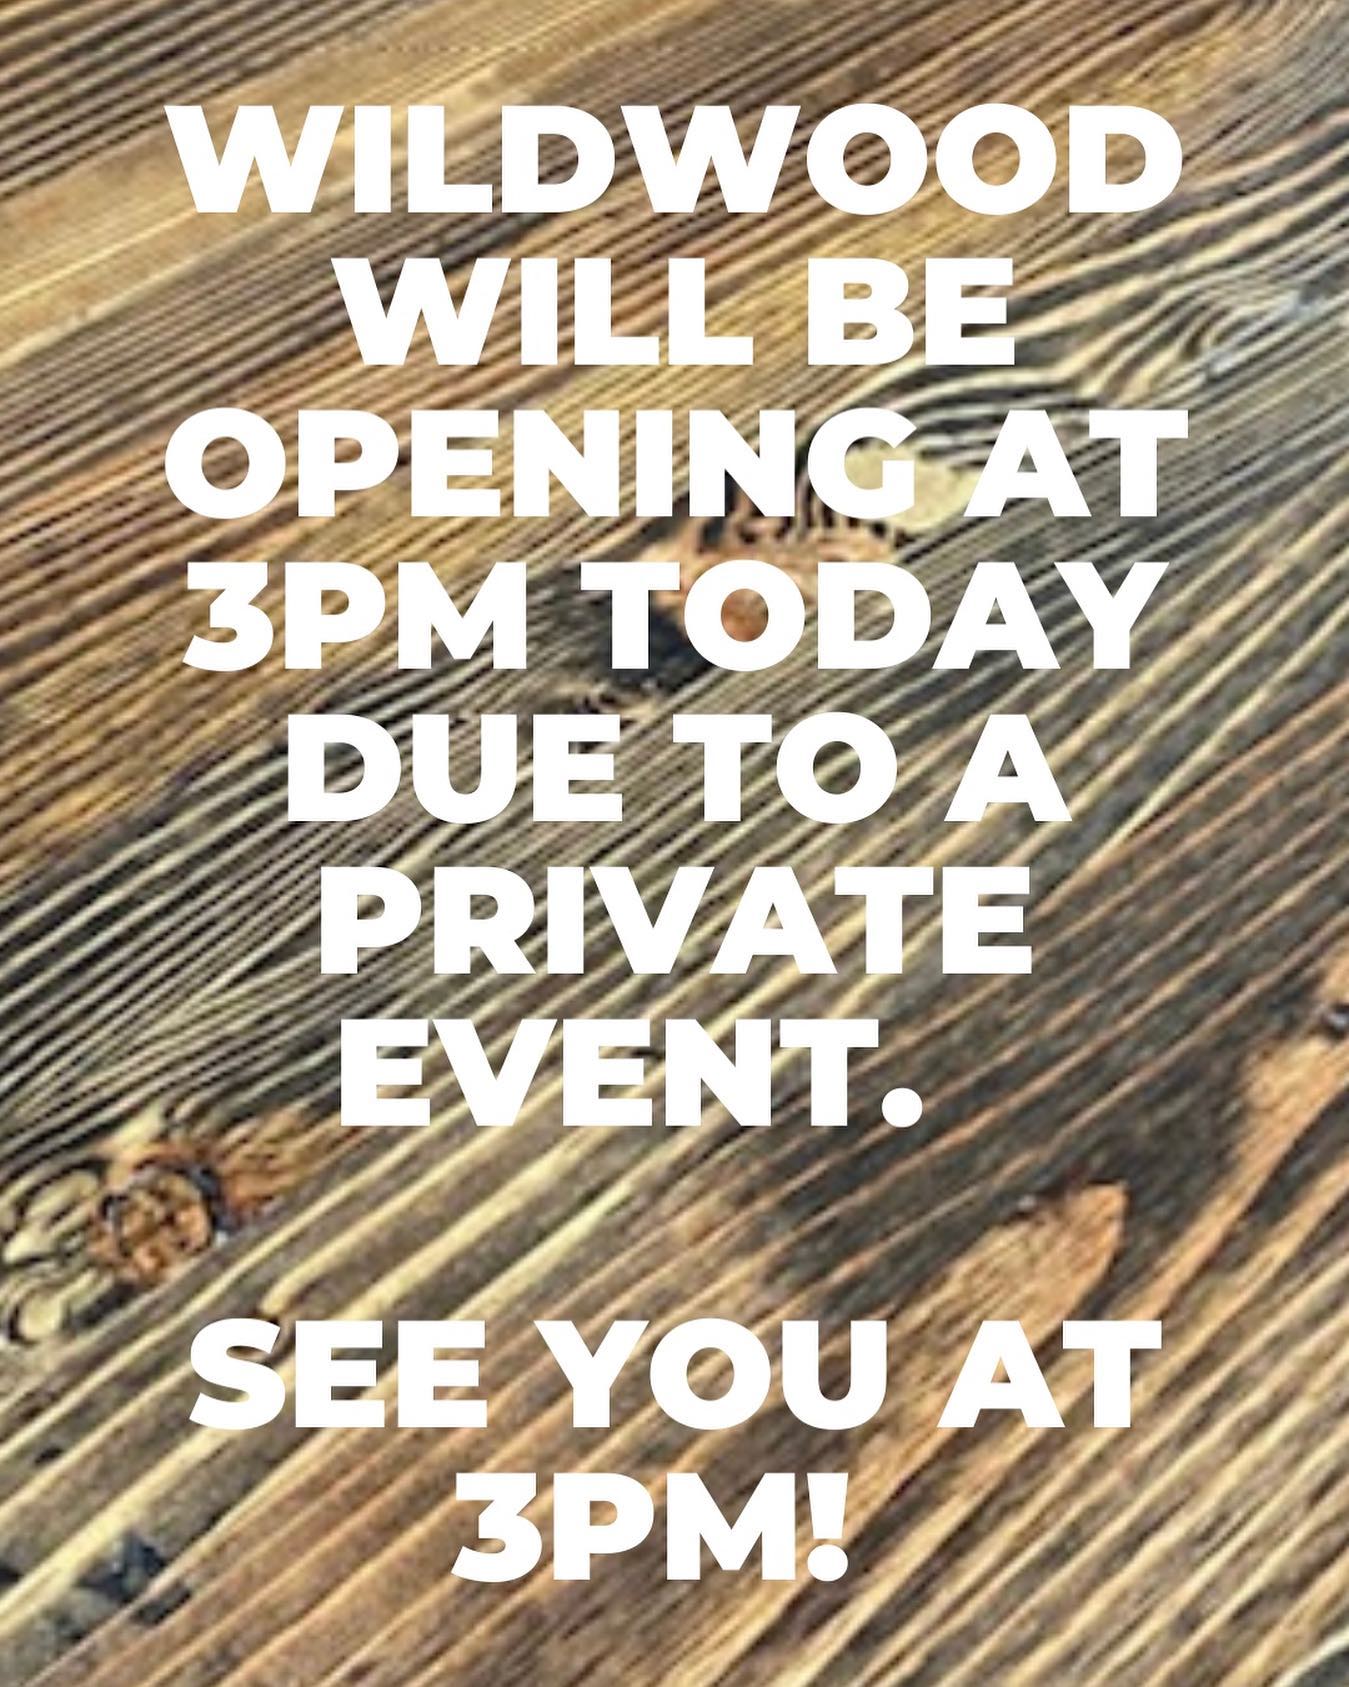 Don’t forget, late open today. See you all at 3pm!
.
.
.
.
#wildwoodtaphouse #wildwoodtap #wildwood #hoursupdate #lateopen #privateevent